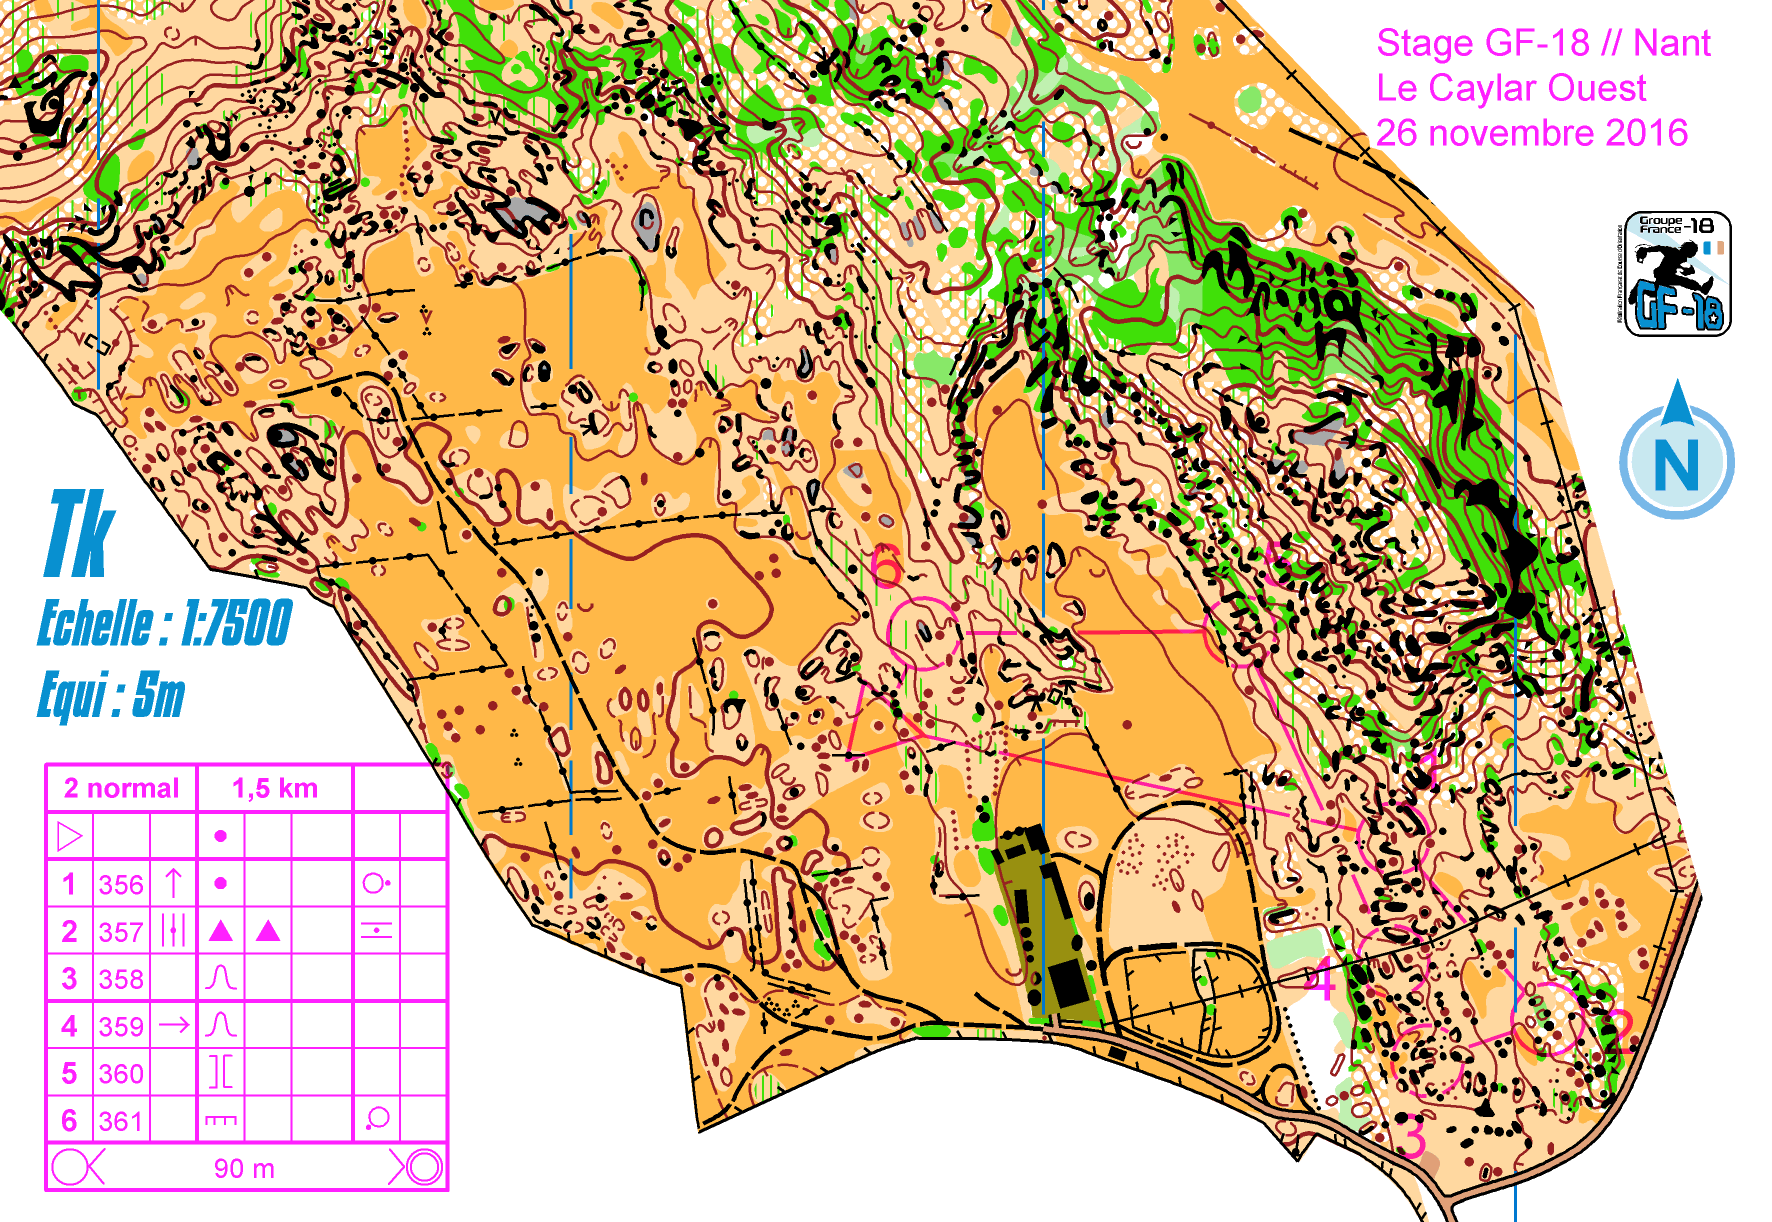 J2 circuit normal stage gf-18 Larzac Caylar Ouest (26/11/2016)